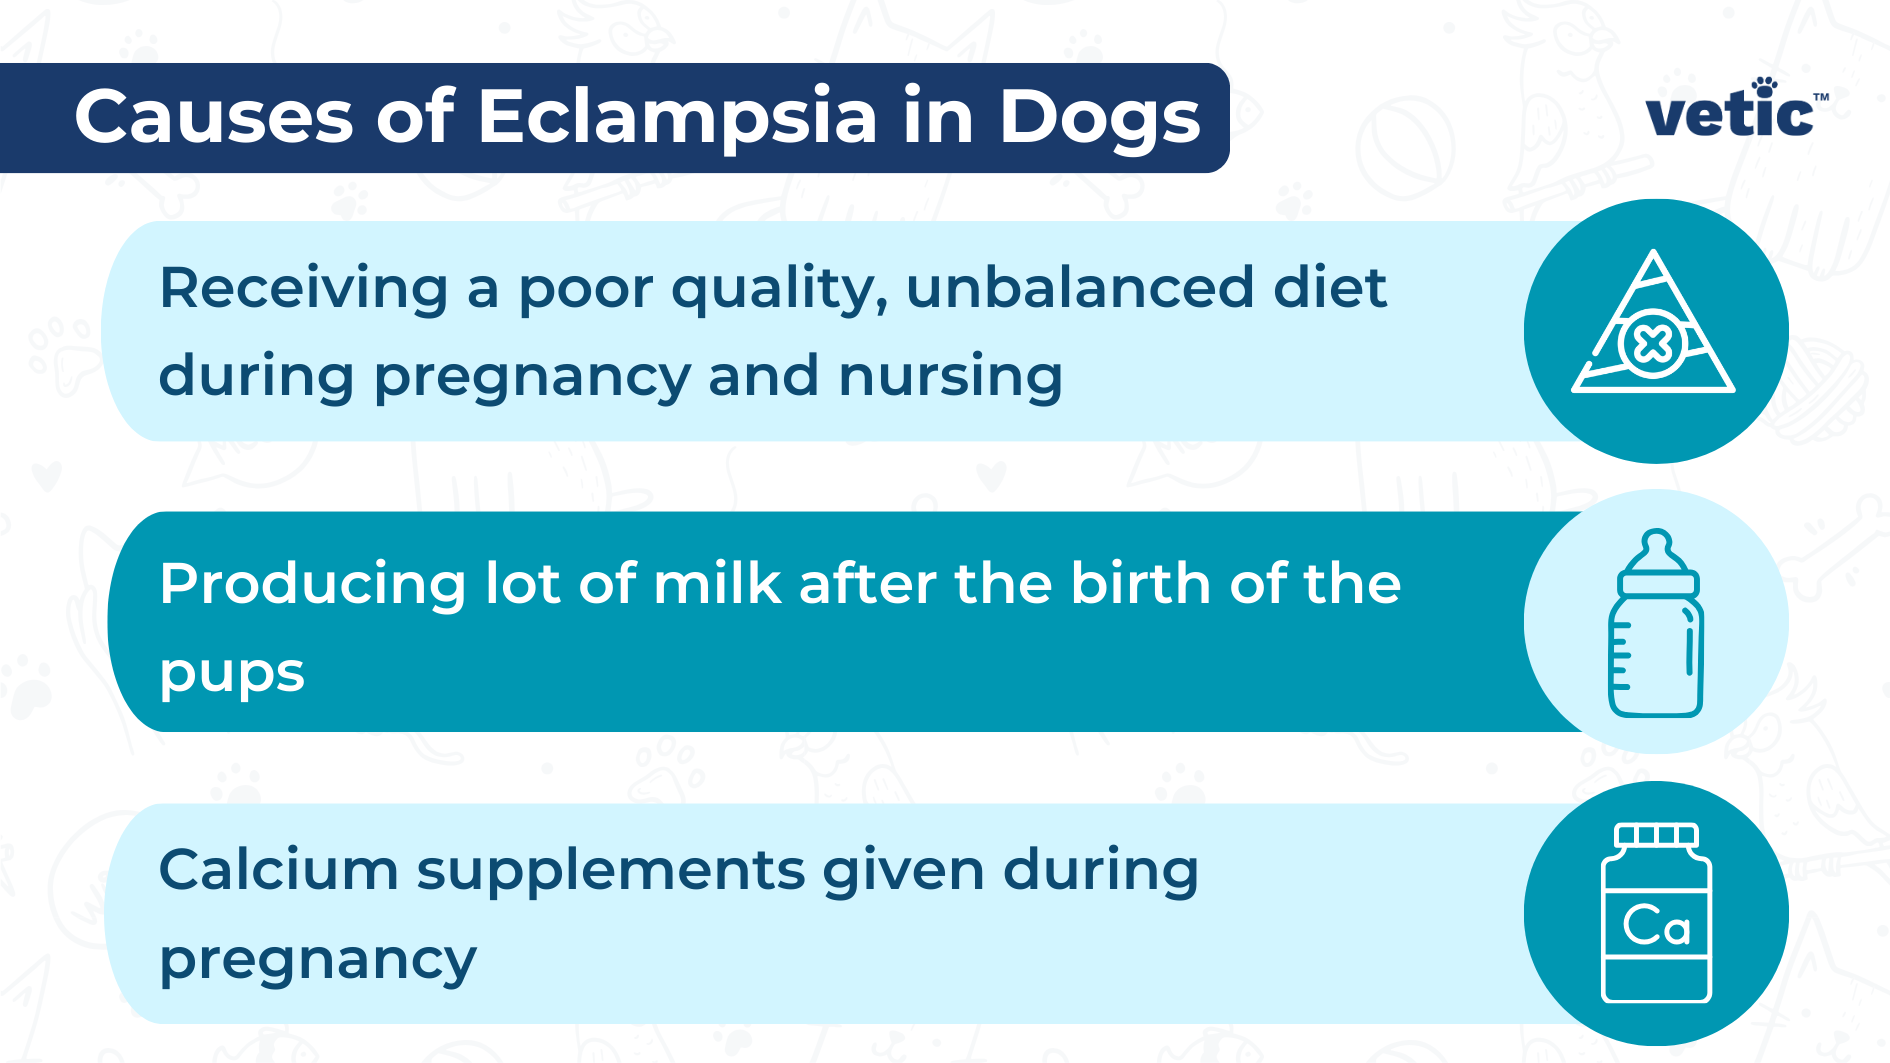 Infographic by Vetic on the Causes of Eclampsia in Dogs 1. Poor nutrition and unbalanced diet 2. High volume of milk production by the mother dog 3. Calcium supplements during pregnancy